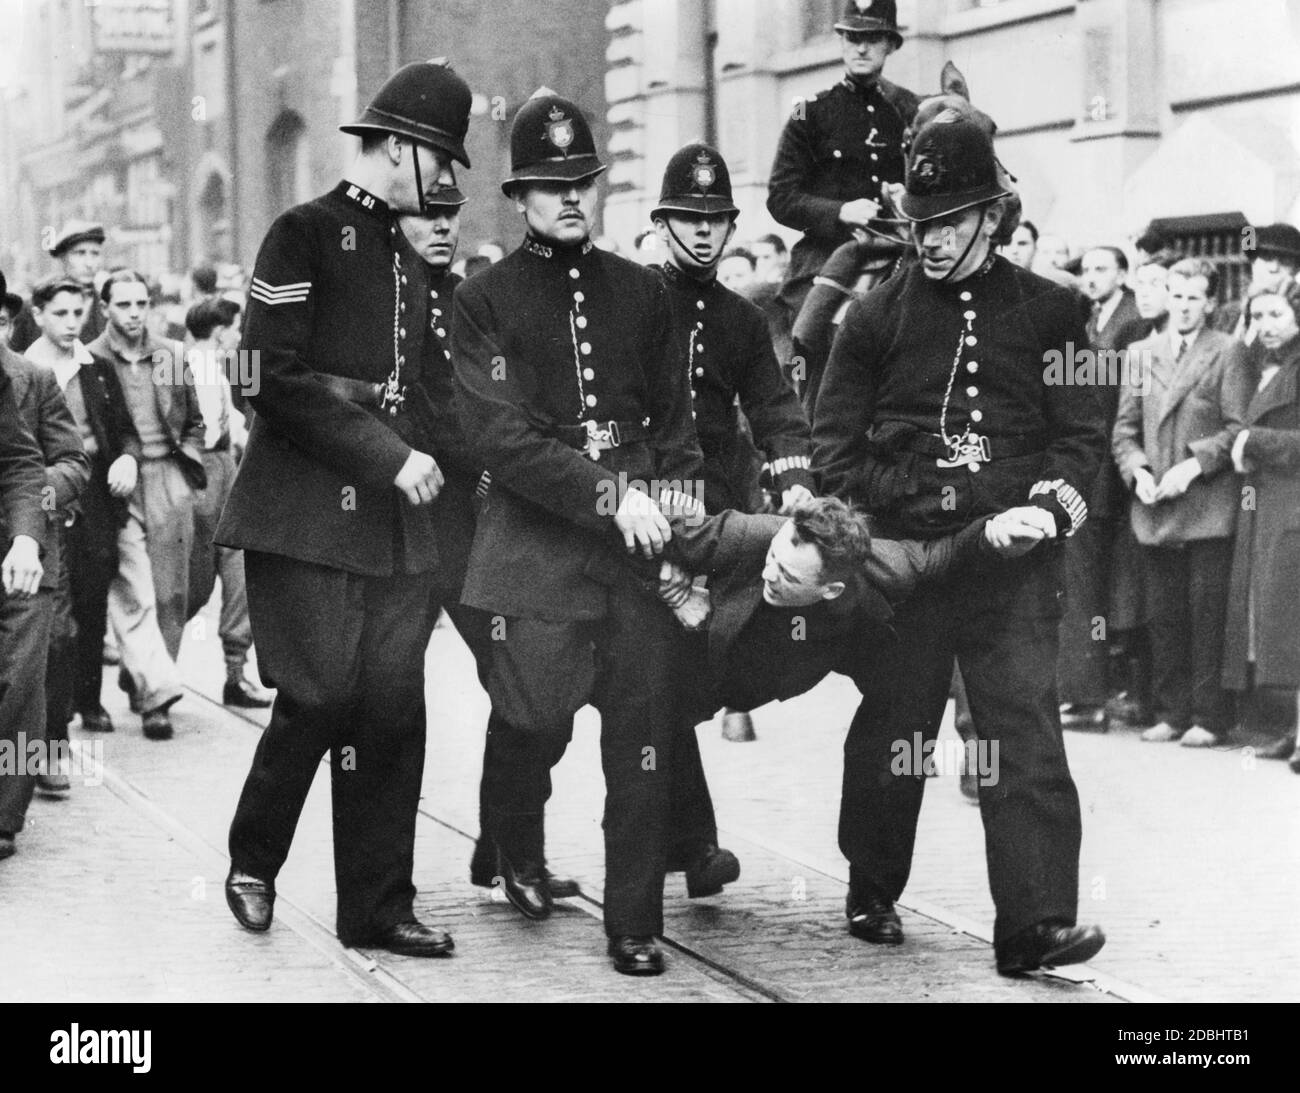 'Police officers carry away an arrested demonstrator. On the occasion of a march of the ''British Union of Fascists'' (BUF) numerous anti-fascist demonstrators had gathered in London and protested against the march.' Stock Photo